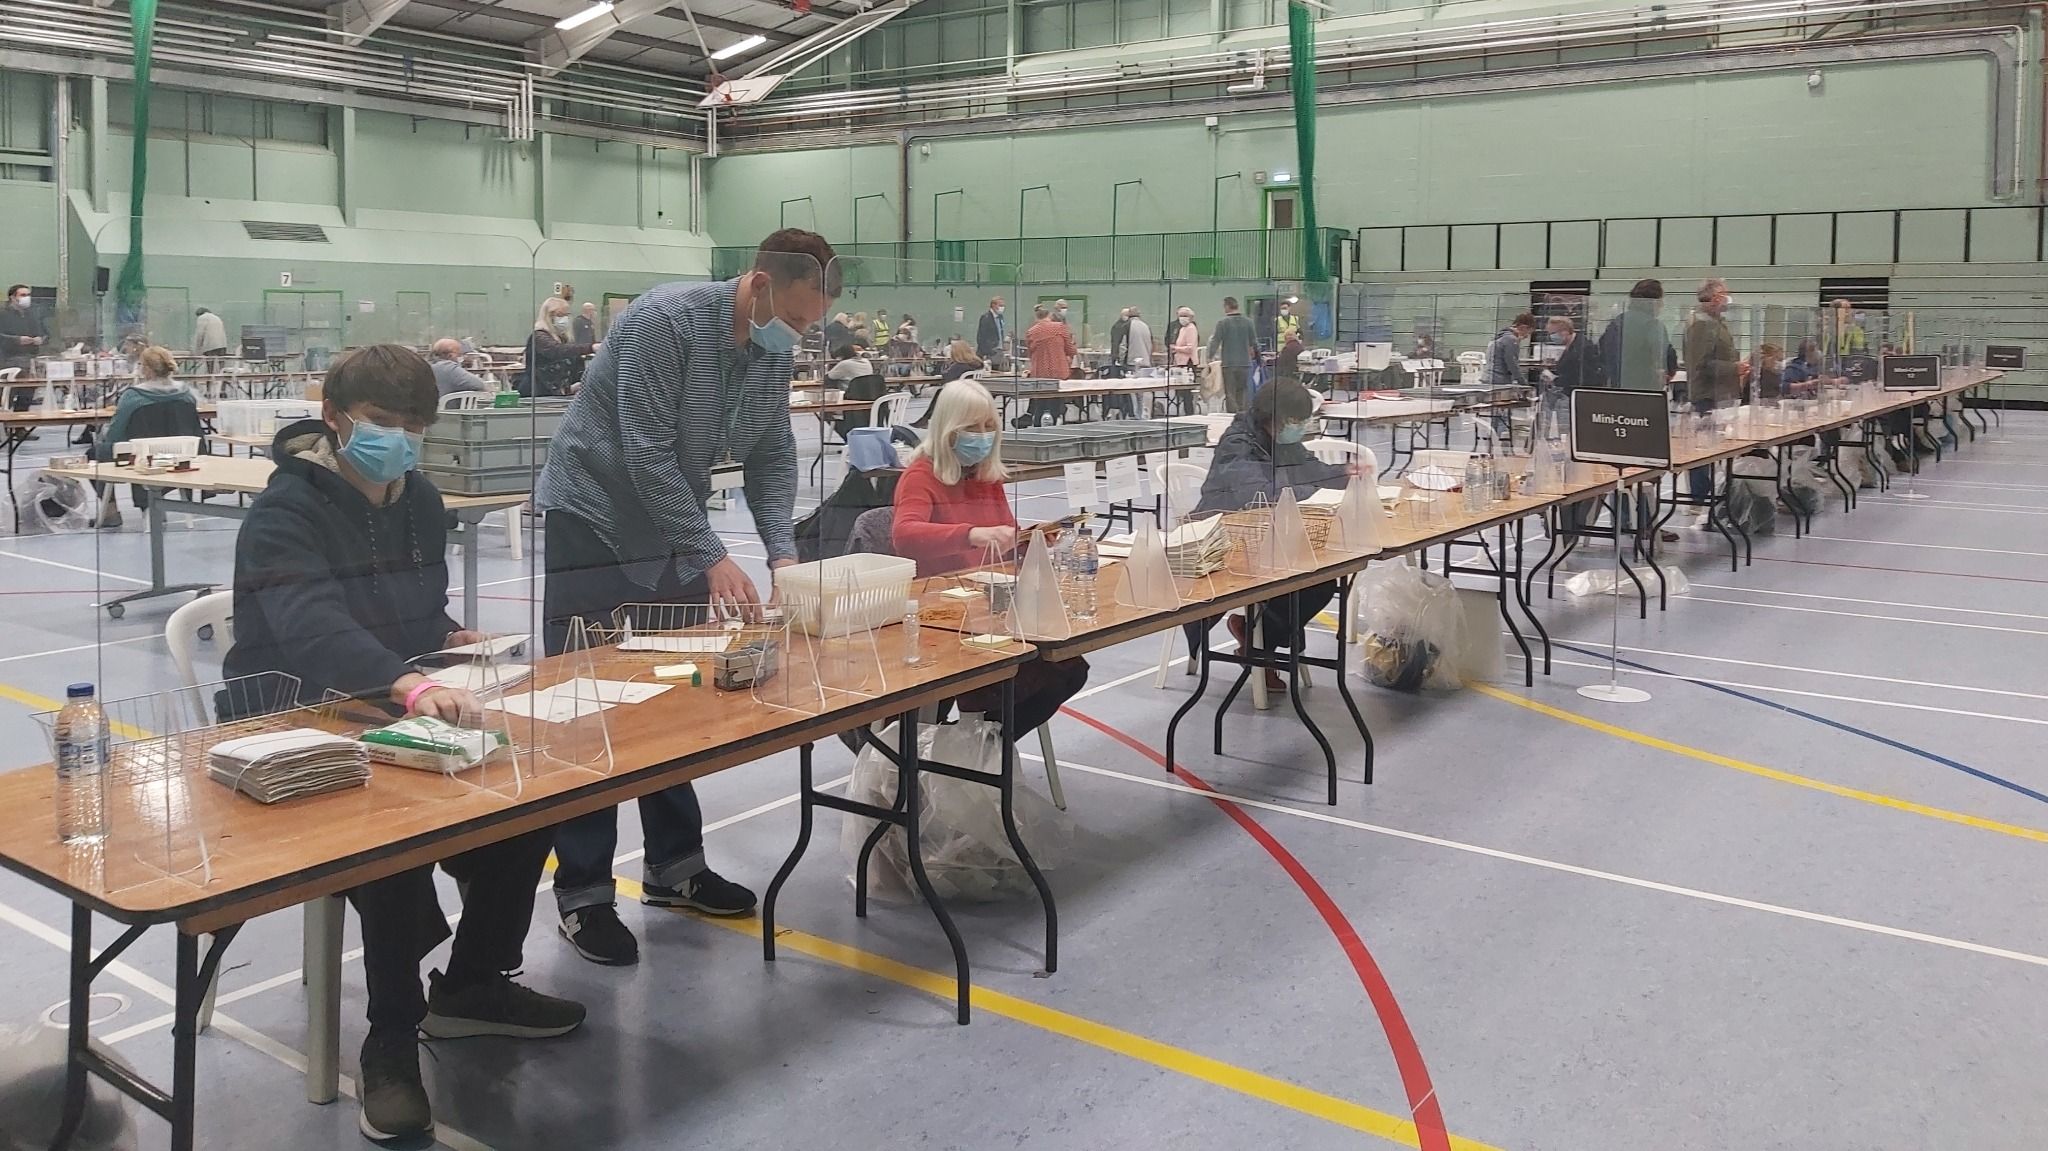 The local election results have been announced for Wiltshire Council